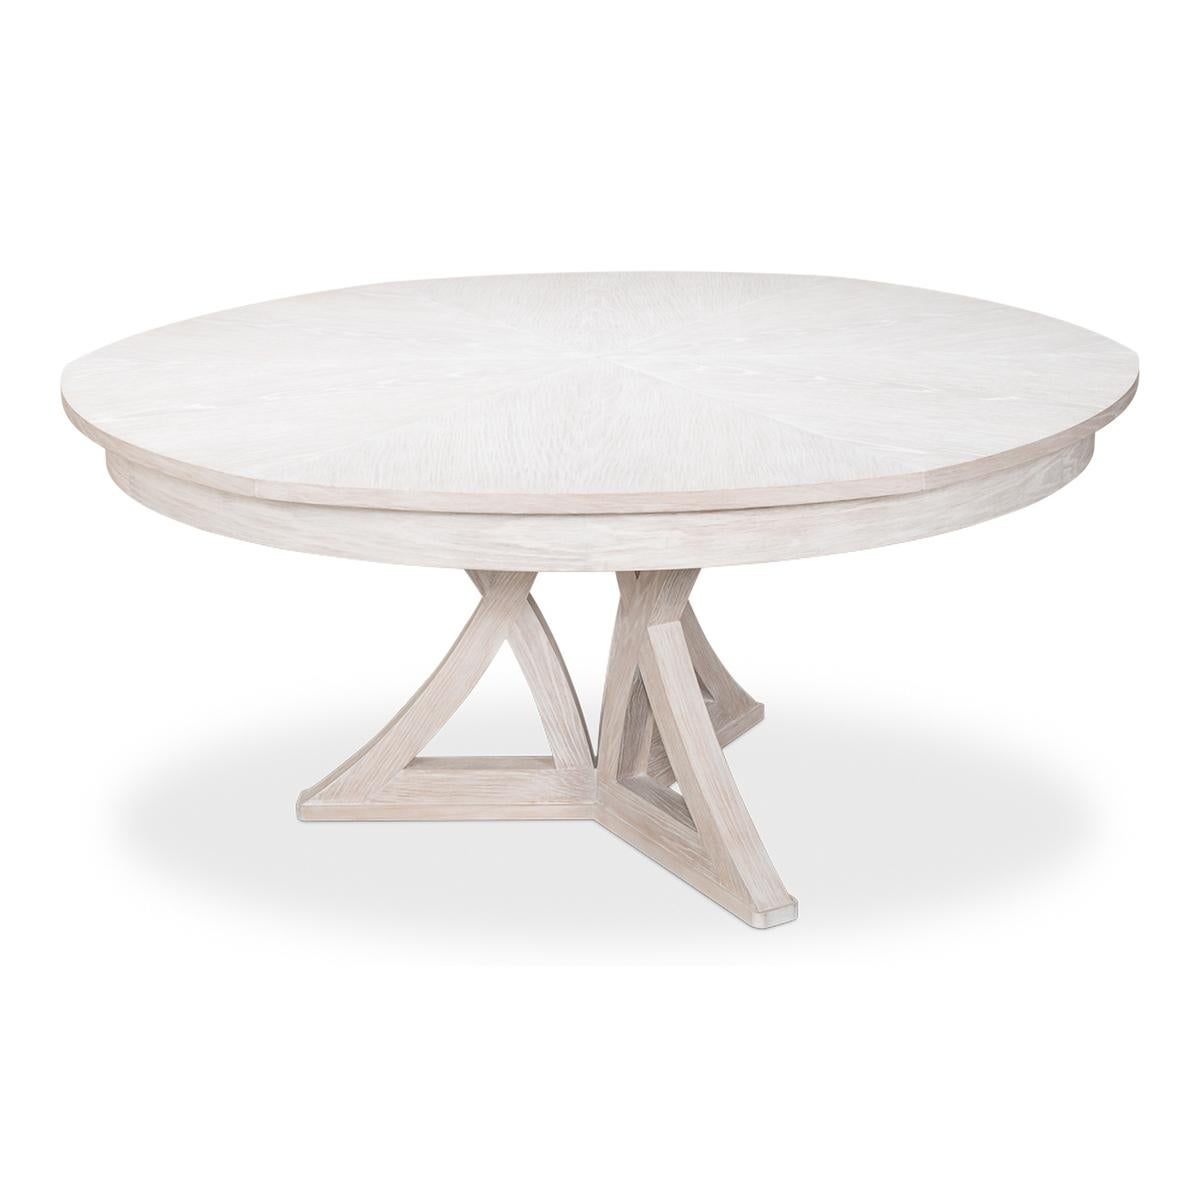 Contemporary Rustic Round Dining Table, Whitewash White For Sale